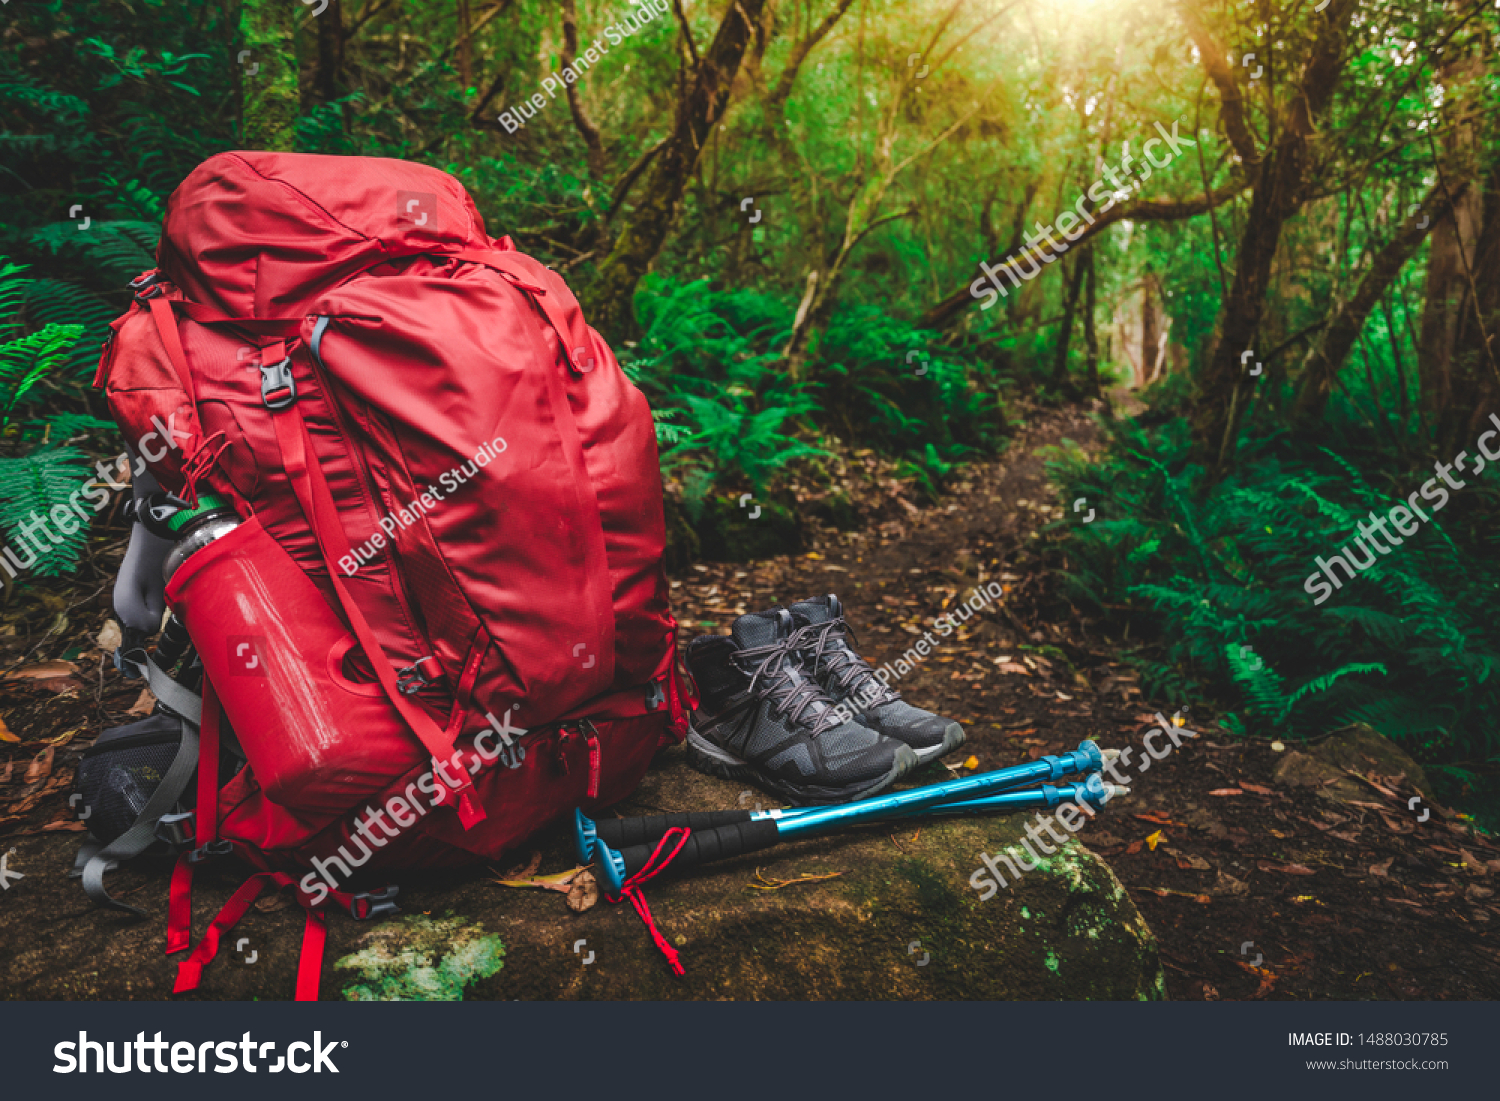 Red backpack, hiking boots, water bottle, hiking poles and supplies for hiker are placed on a large rock in lush rain forest path of Tasmania, Australia. Trekking camping and hiking adventure concept. #1488030785